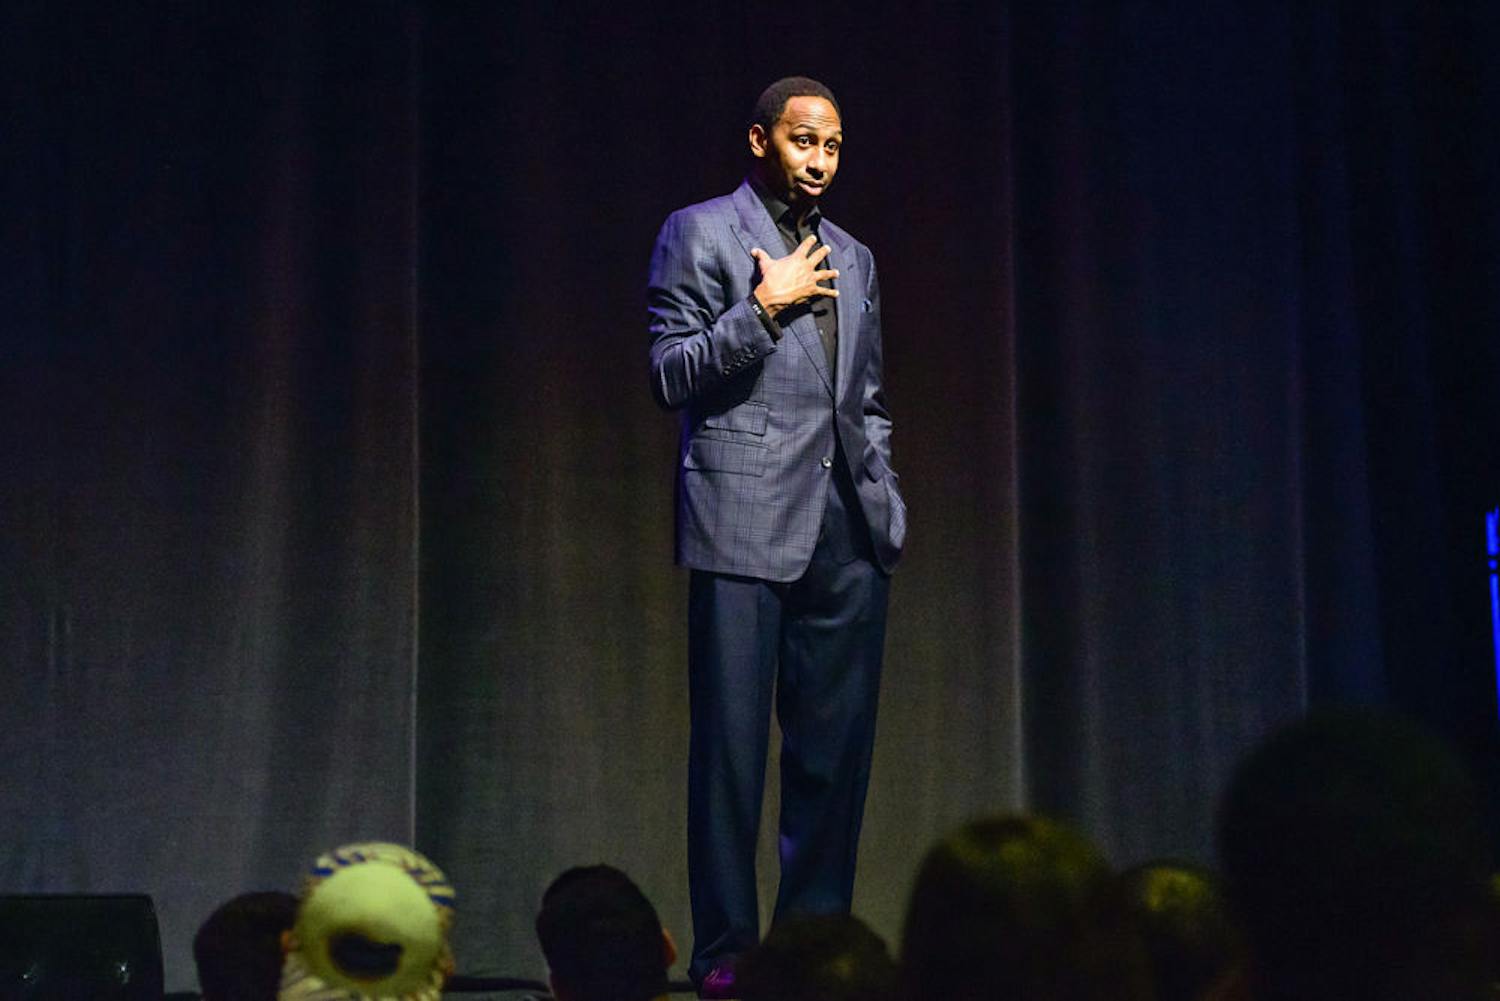 ESPN columnist, sports analyst and radio host Stephen A. Smith speaks to students at the Phillips Center for the Performing Arts on Nov. 12, 2014.